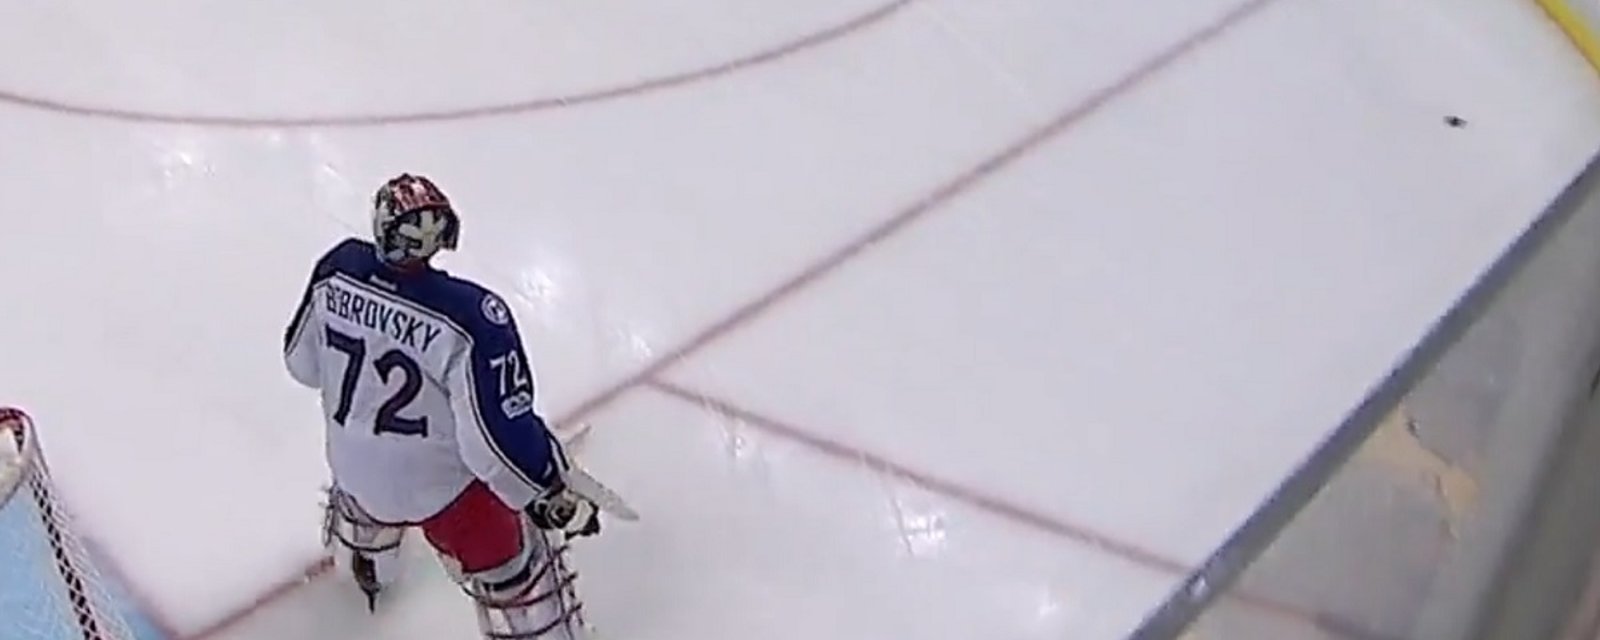 HUGE mistake from Bobrovsky gives Crosby his 50th career playoff goal.